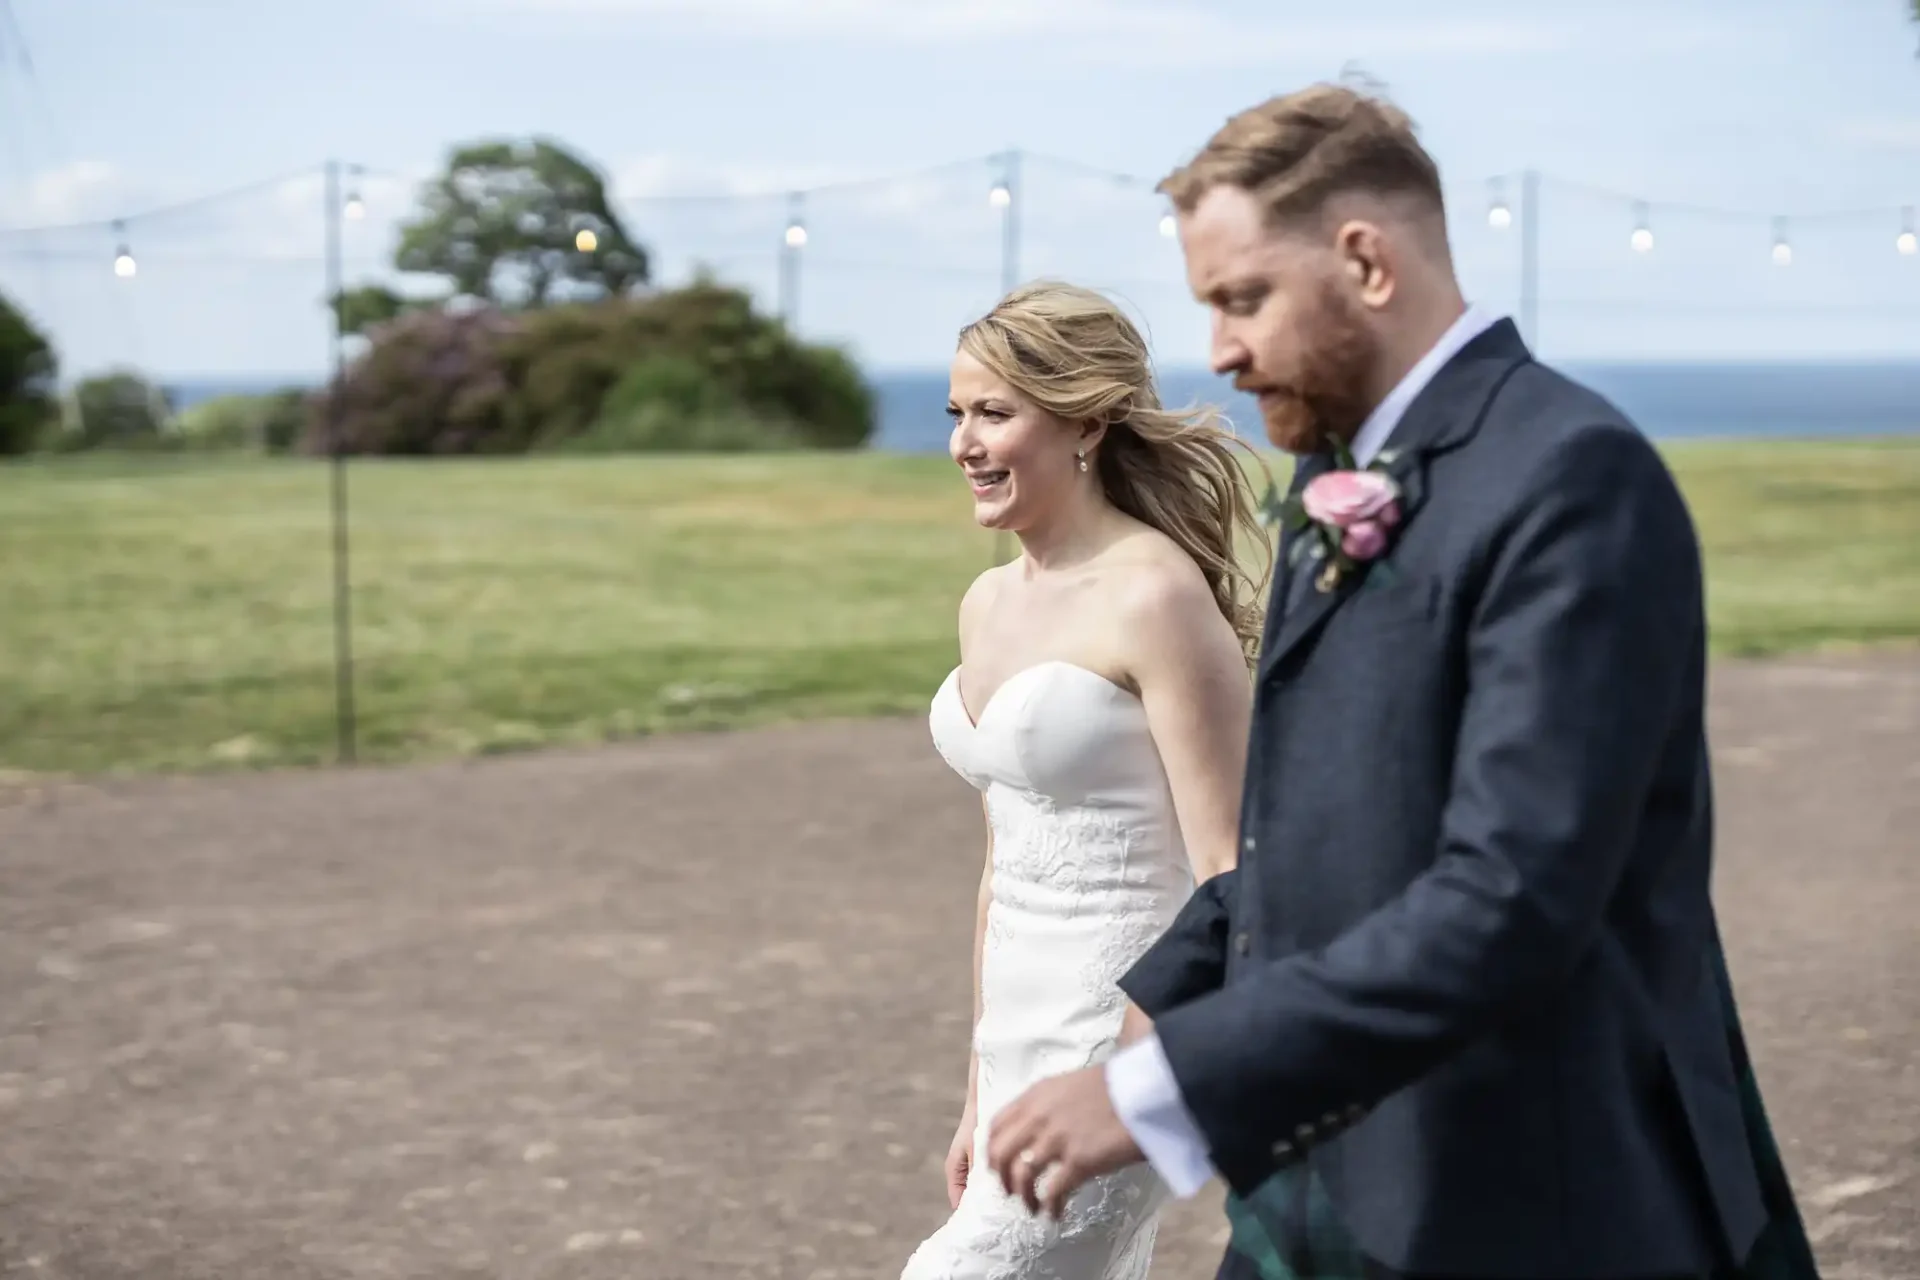 A bride and groom walking hand in hand outdoors, both smiling, on a sunny day with string lights and trees in the background.